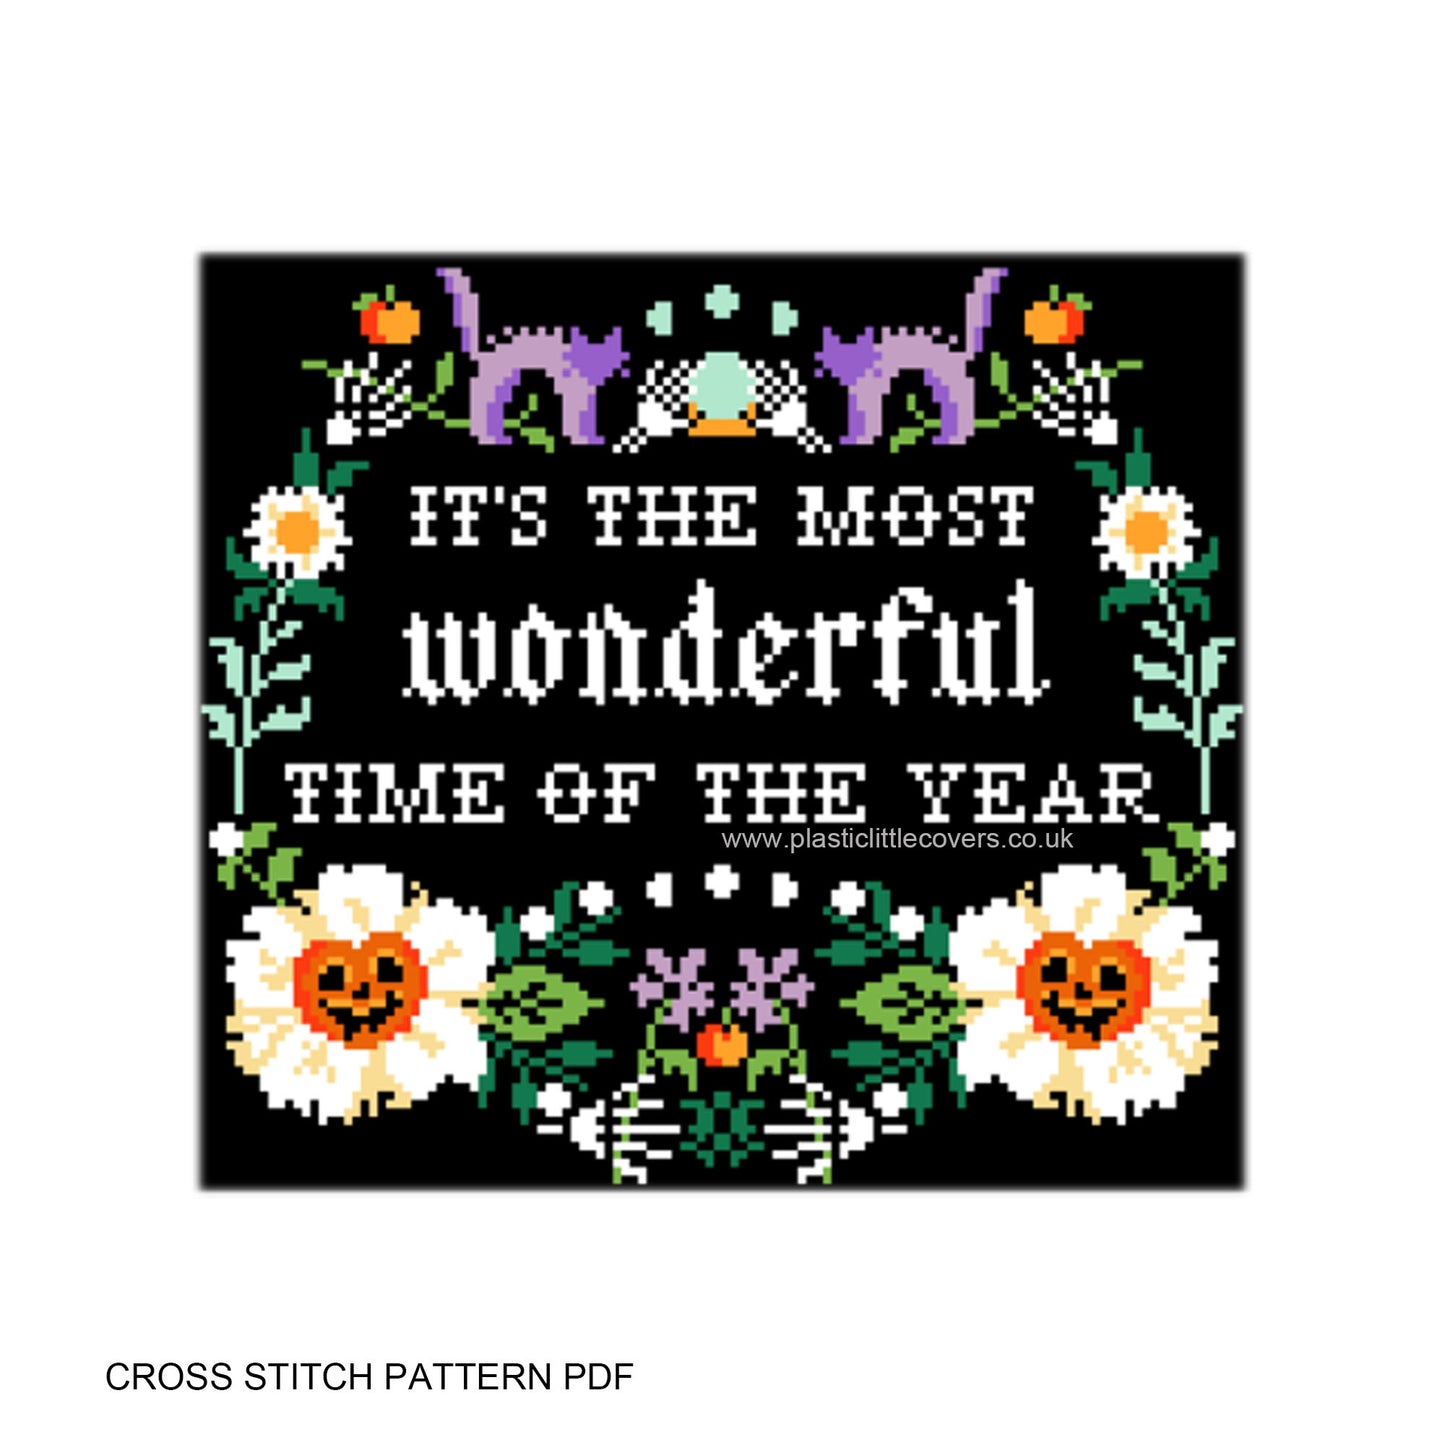 It's the Most Wonderful Time of the Year - Halloween Cross Stitch Pattern PDF.